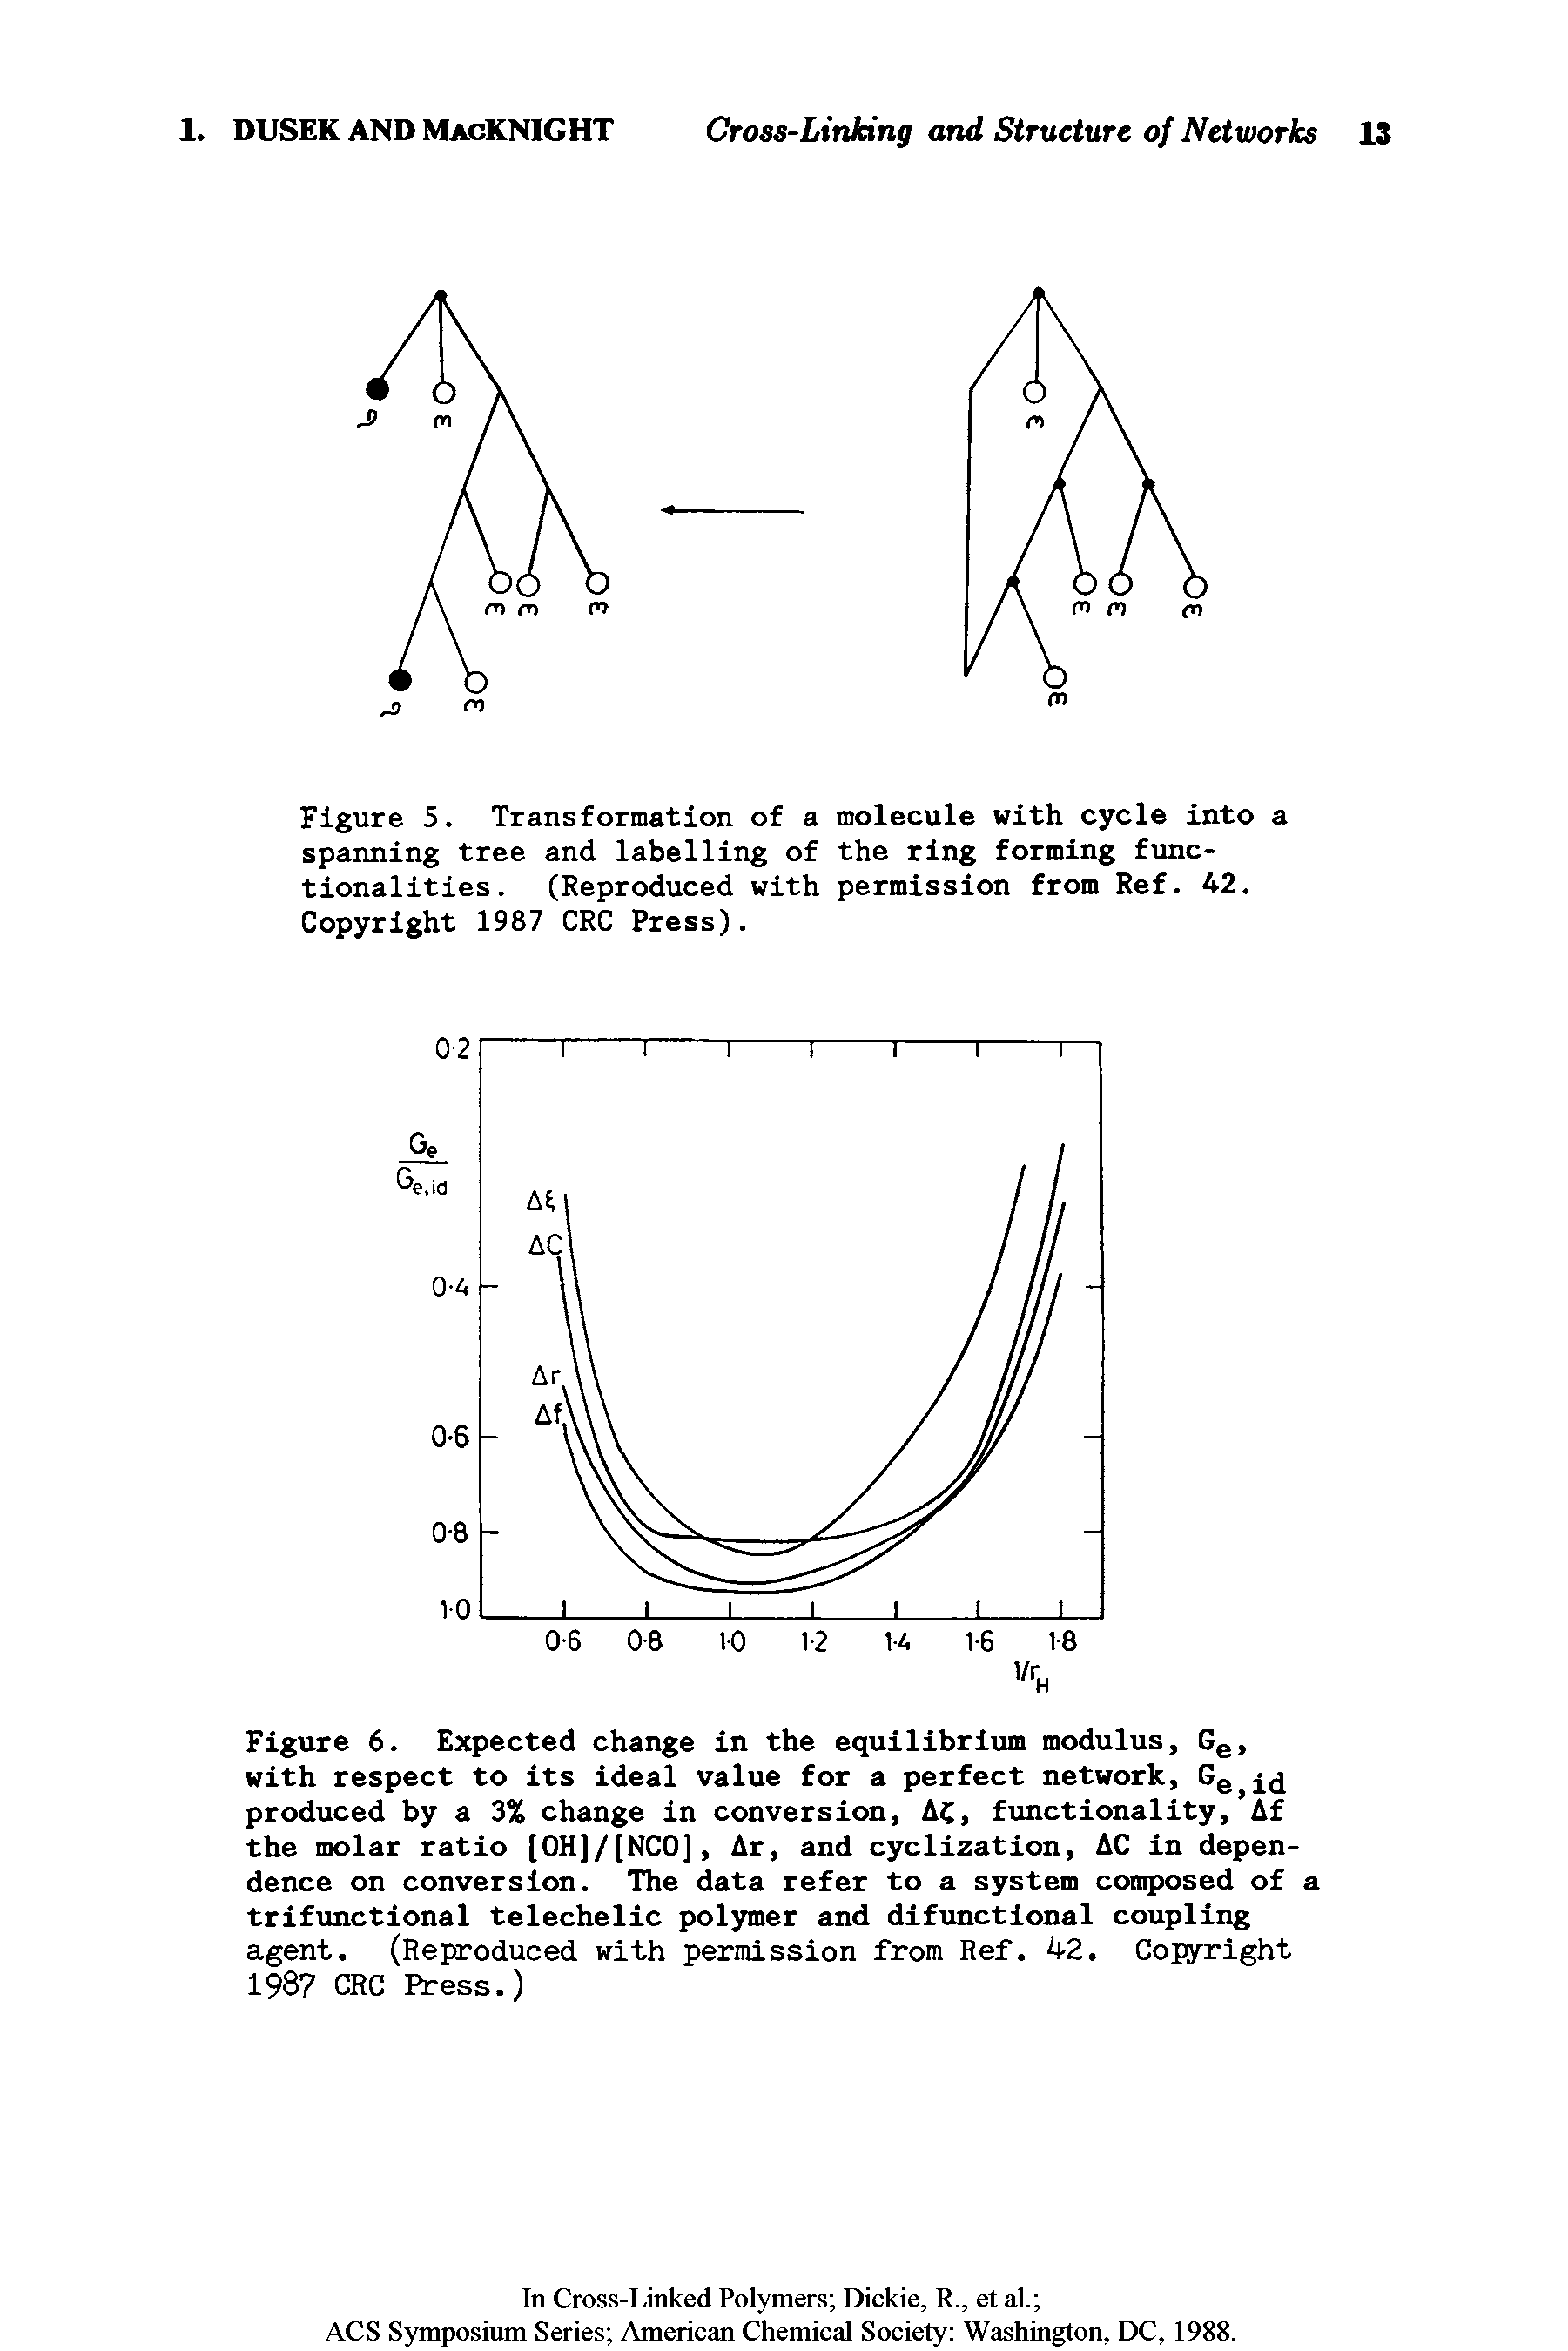 Figure 5. Transformation of a molecule with cycle into a spanning tree and labelling of the ring forming functionalities. (Reproduced with permission from Ref. 42. Copyright 1987 CRC Press).